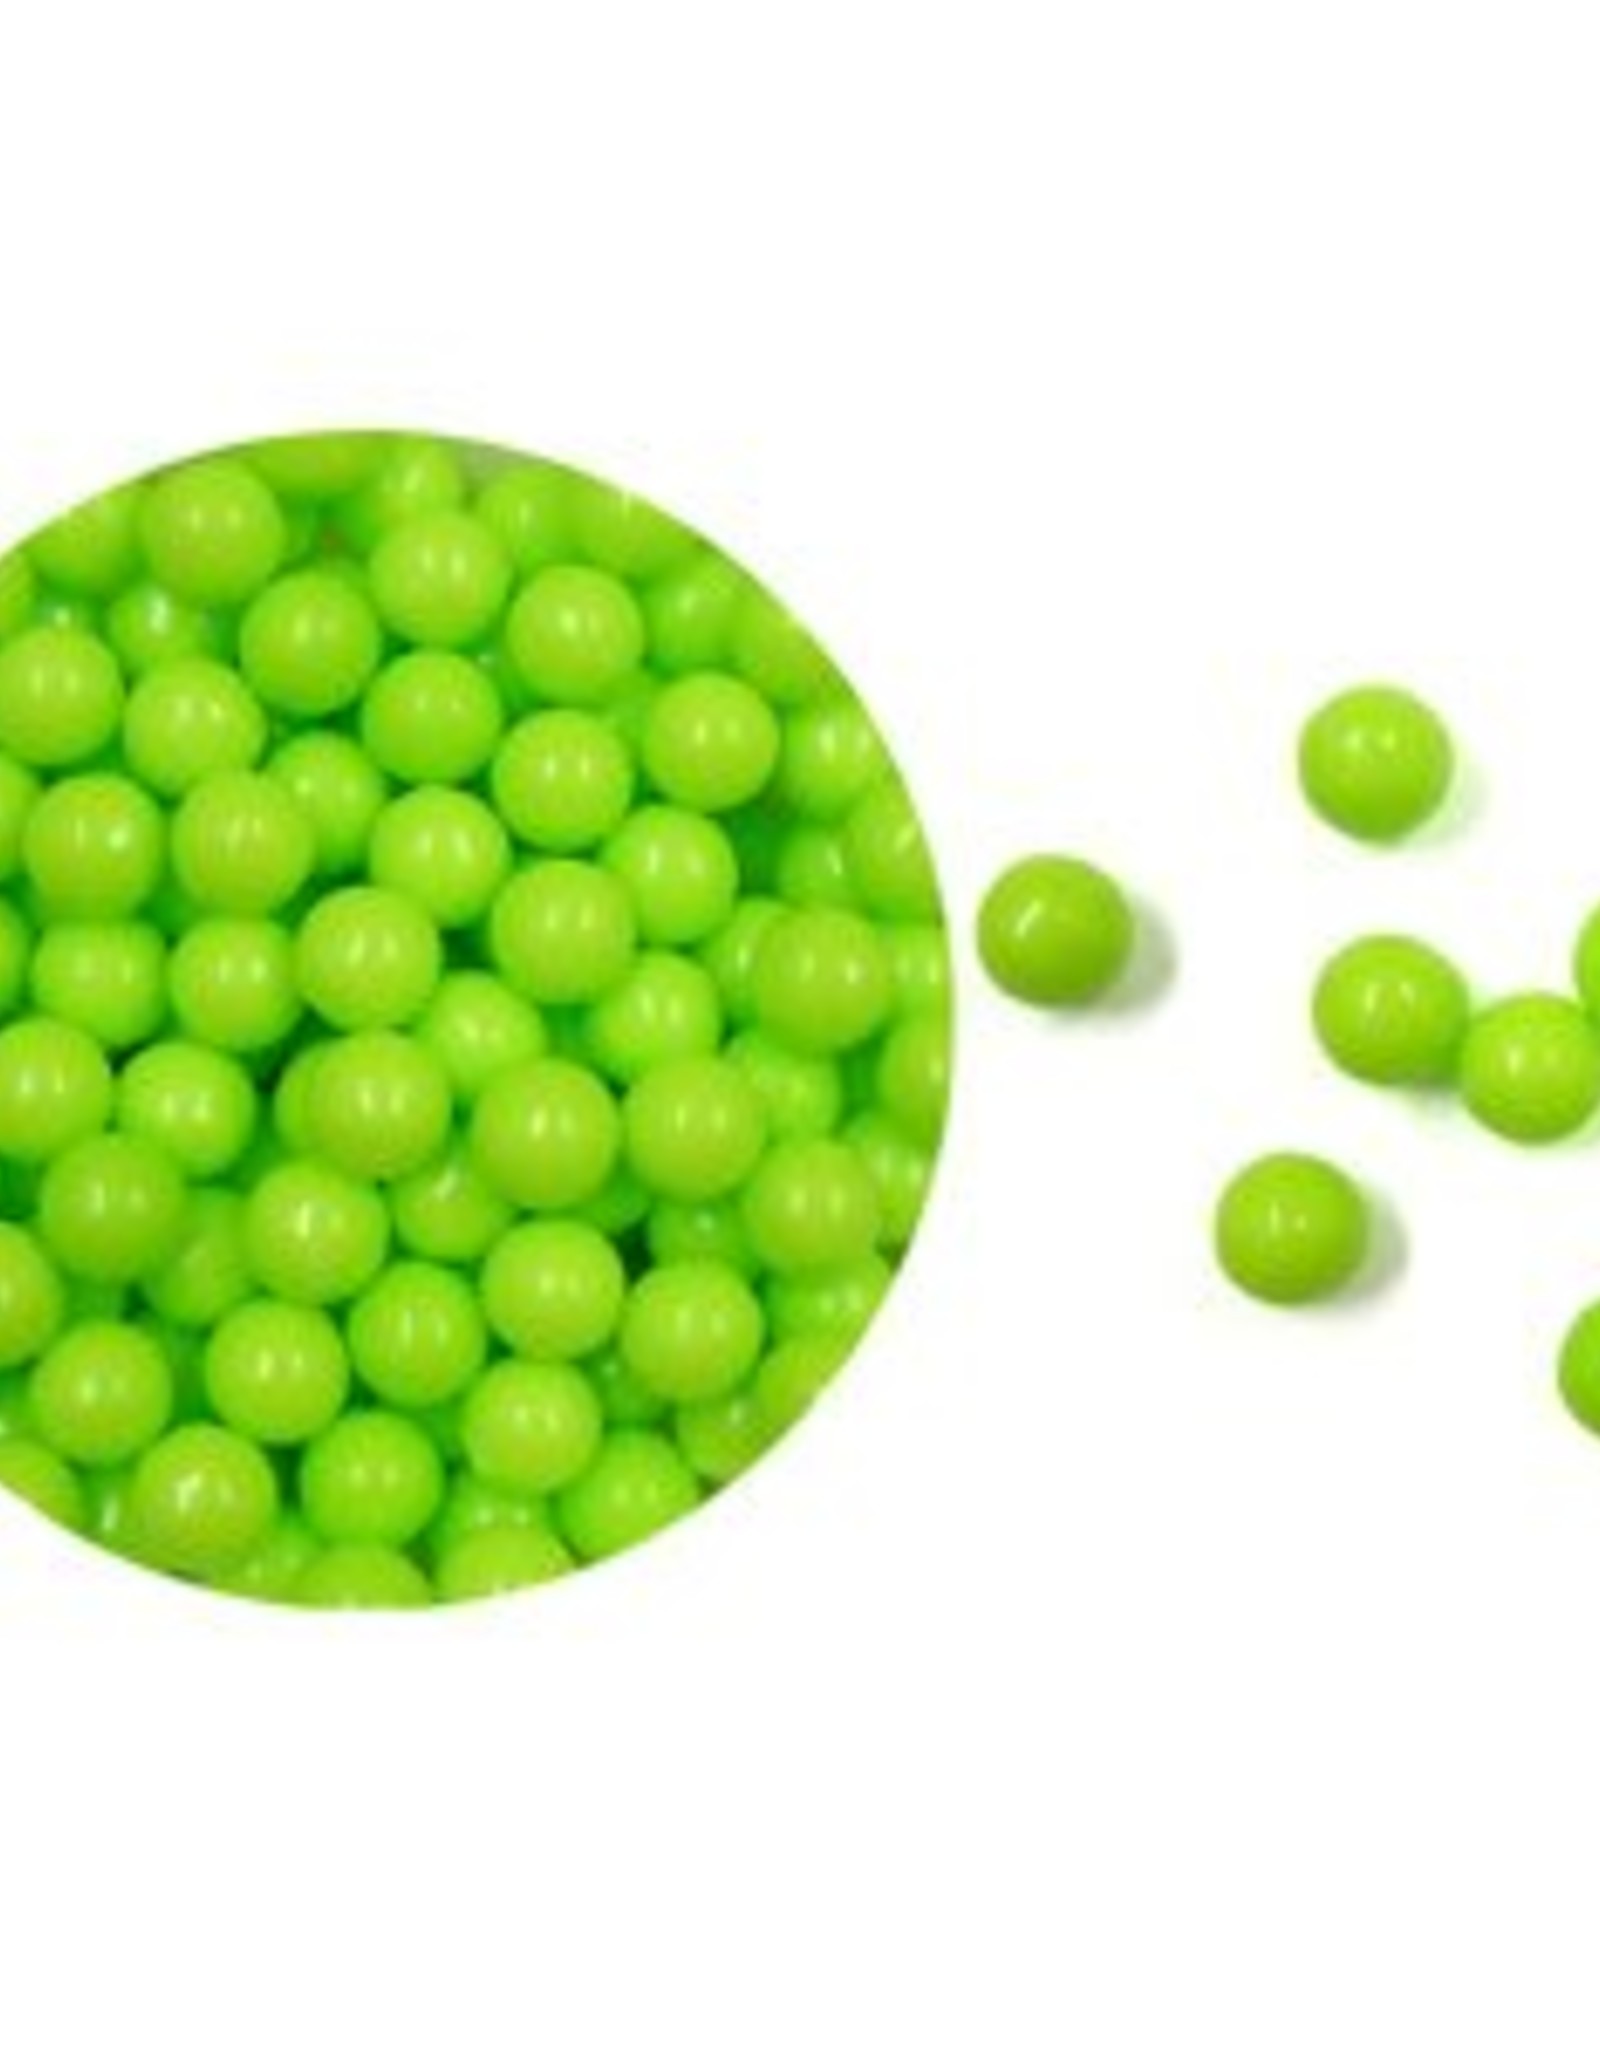 Green (Pearl Lime) Candy Beads 7mm